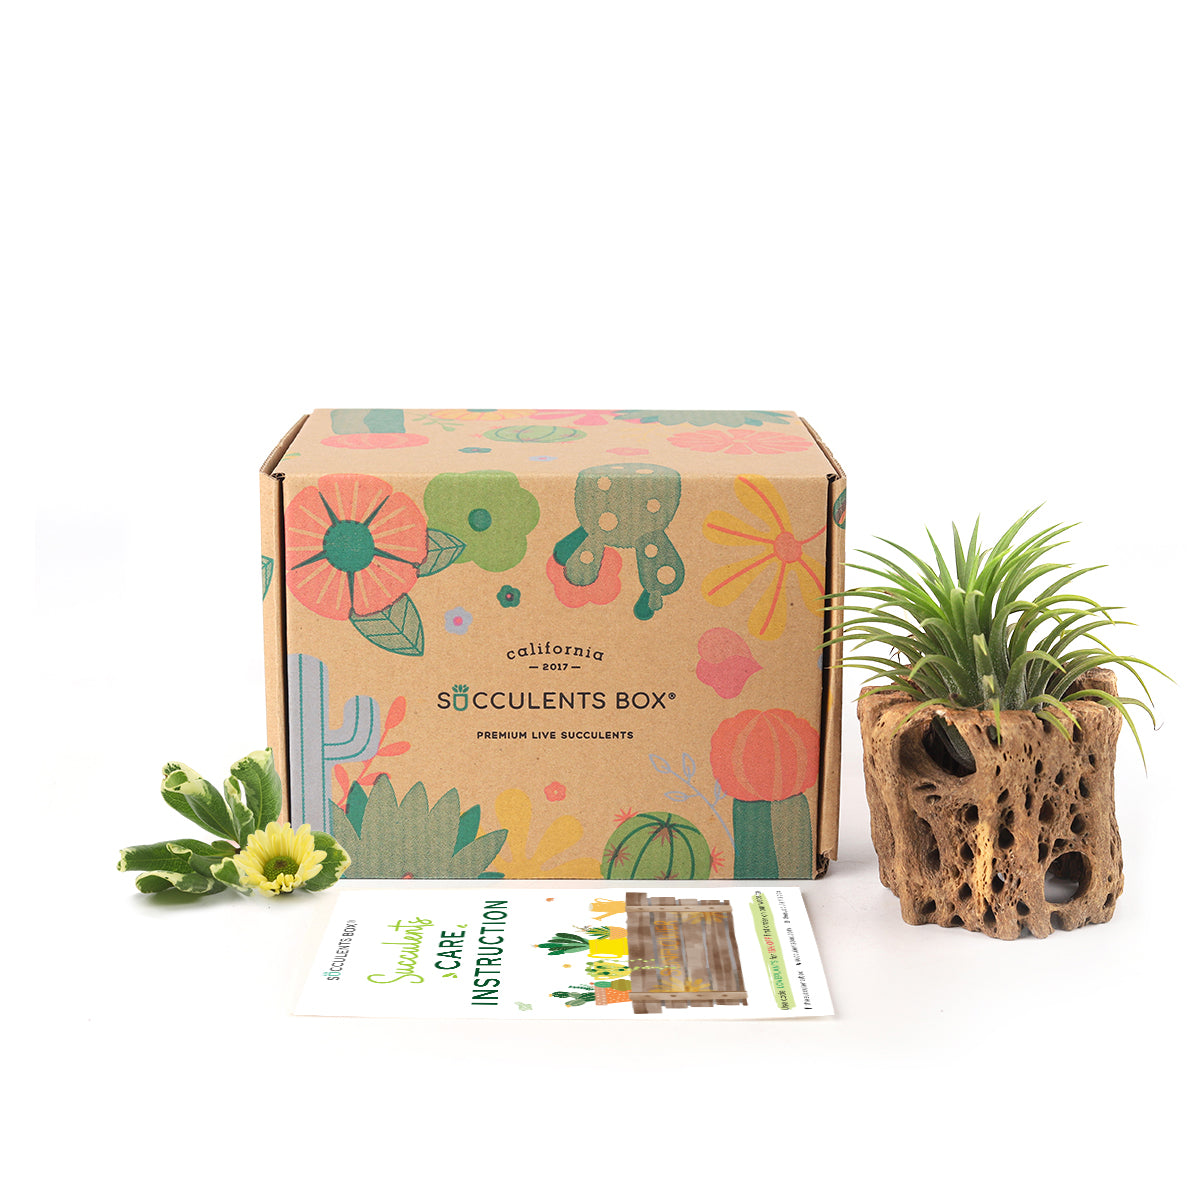 Gift 1 Airplant 1 Accessory/ month - 6 month subscription